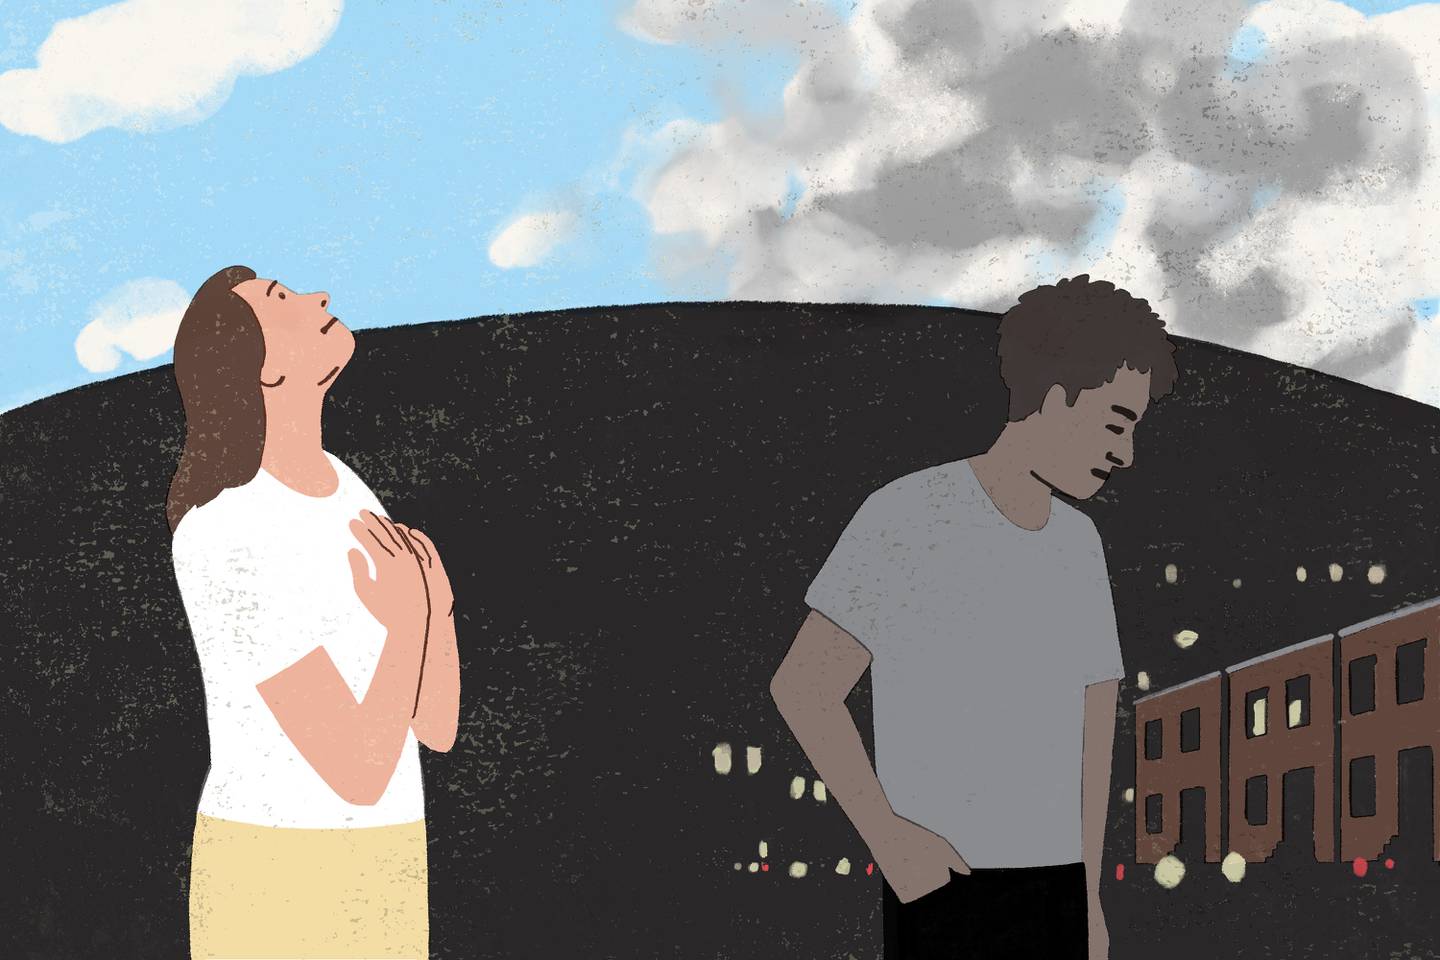 Illustration of white woman looking up at a sunny sky on left, and Black teen boy turning away from cloudy sky above him on right. There are rowhomes in background next to him.